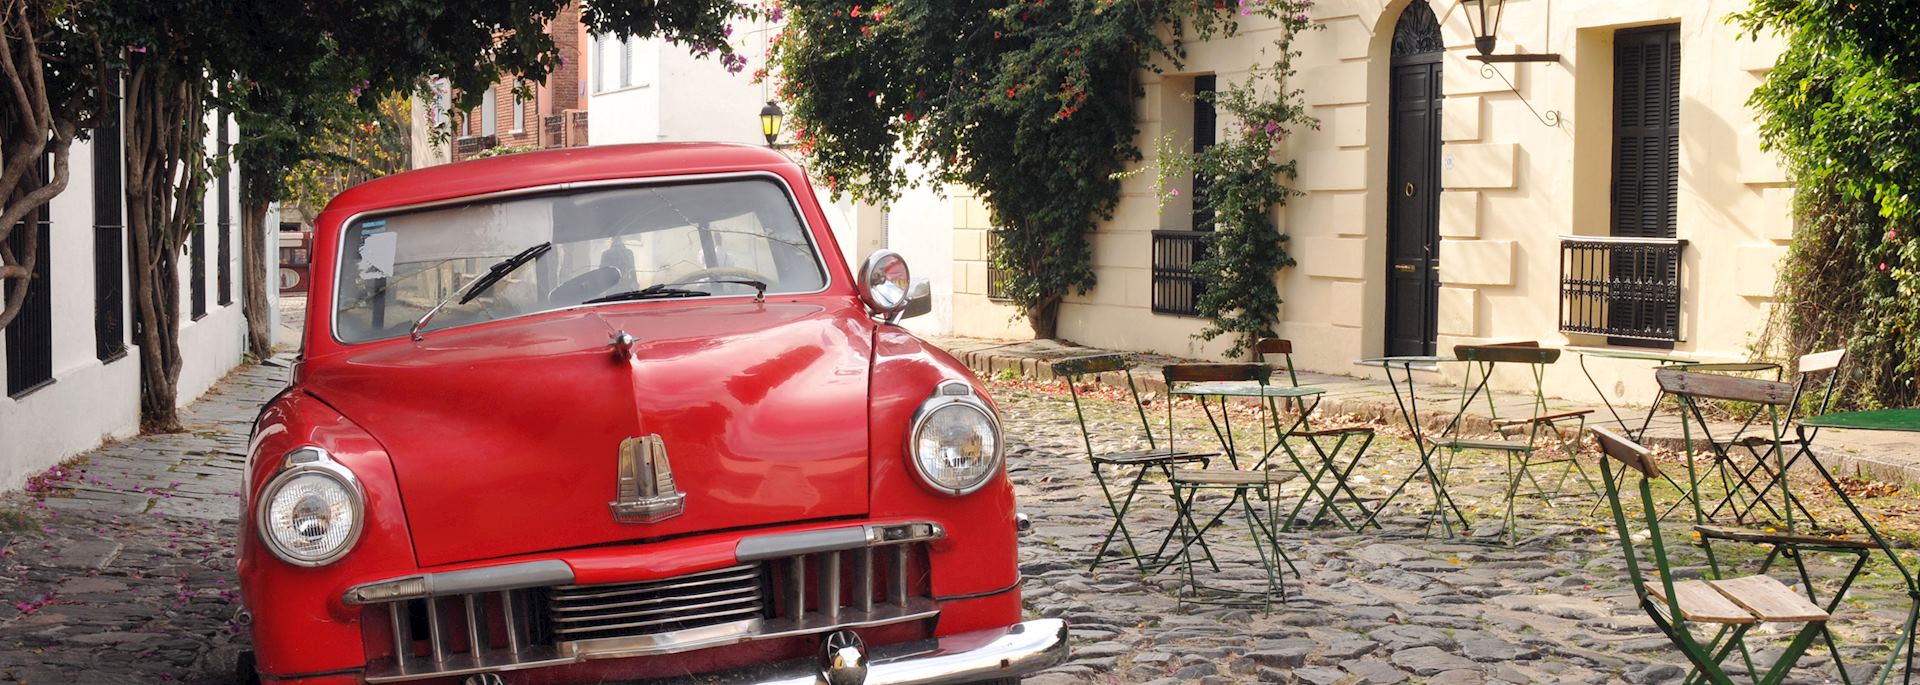 1950s car on one of Uruguay's cobbled streets